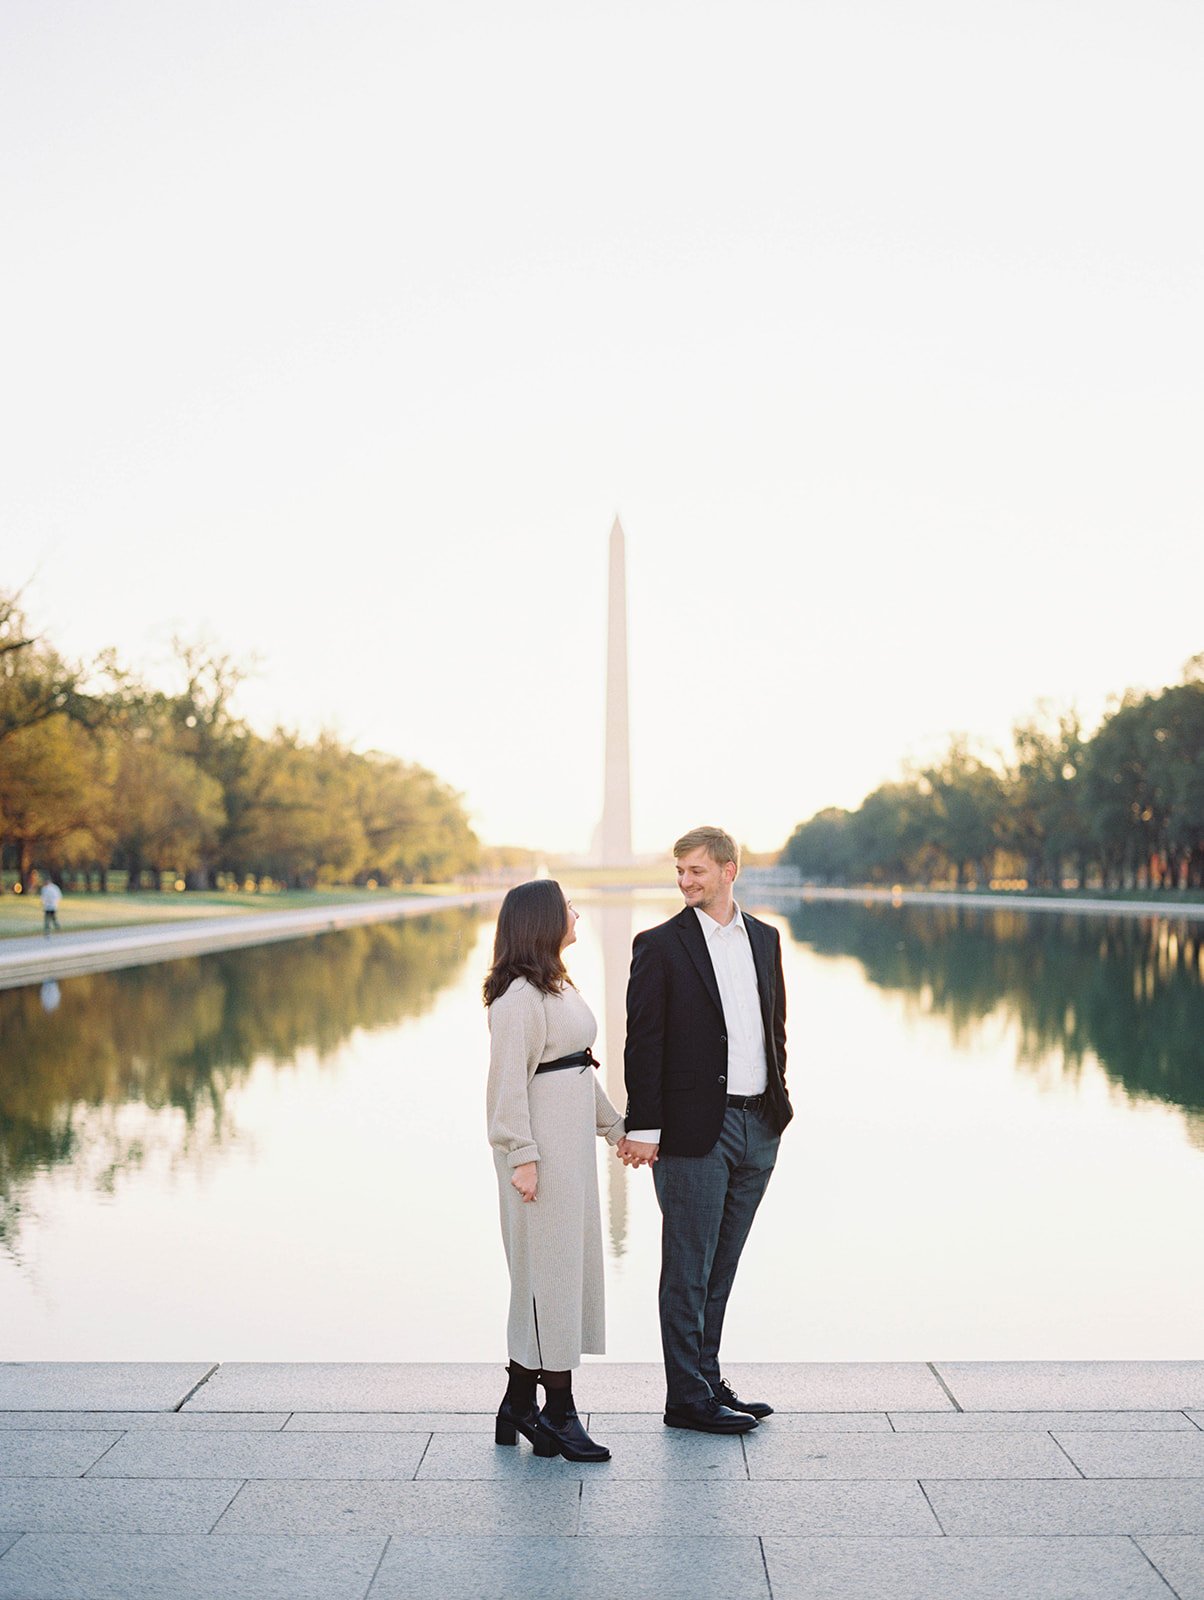 Washington DC Engagement Session Andrew & Rachel by Ica Images www.icaimages.com 13_websize.jpg